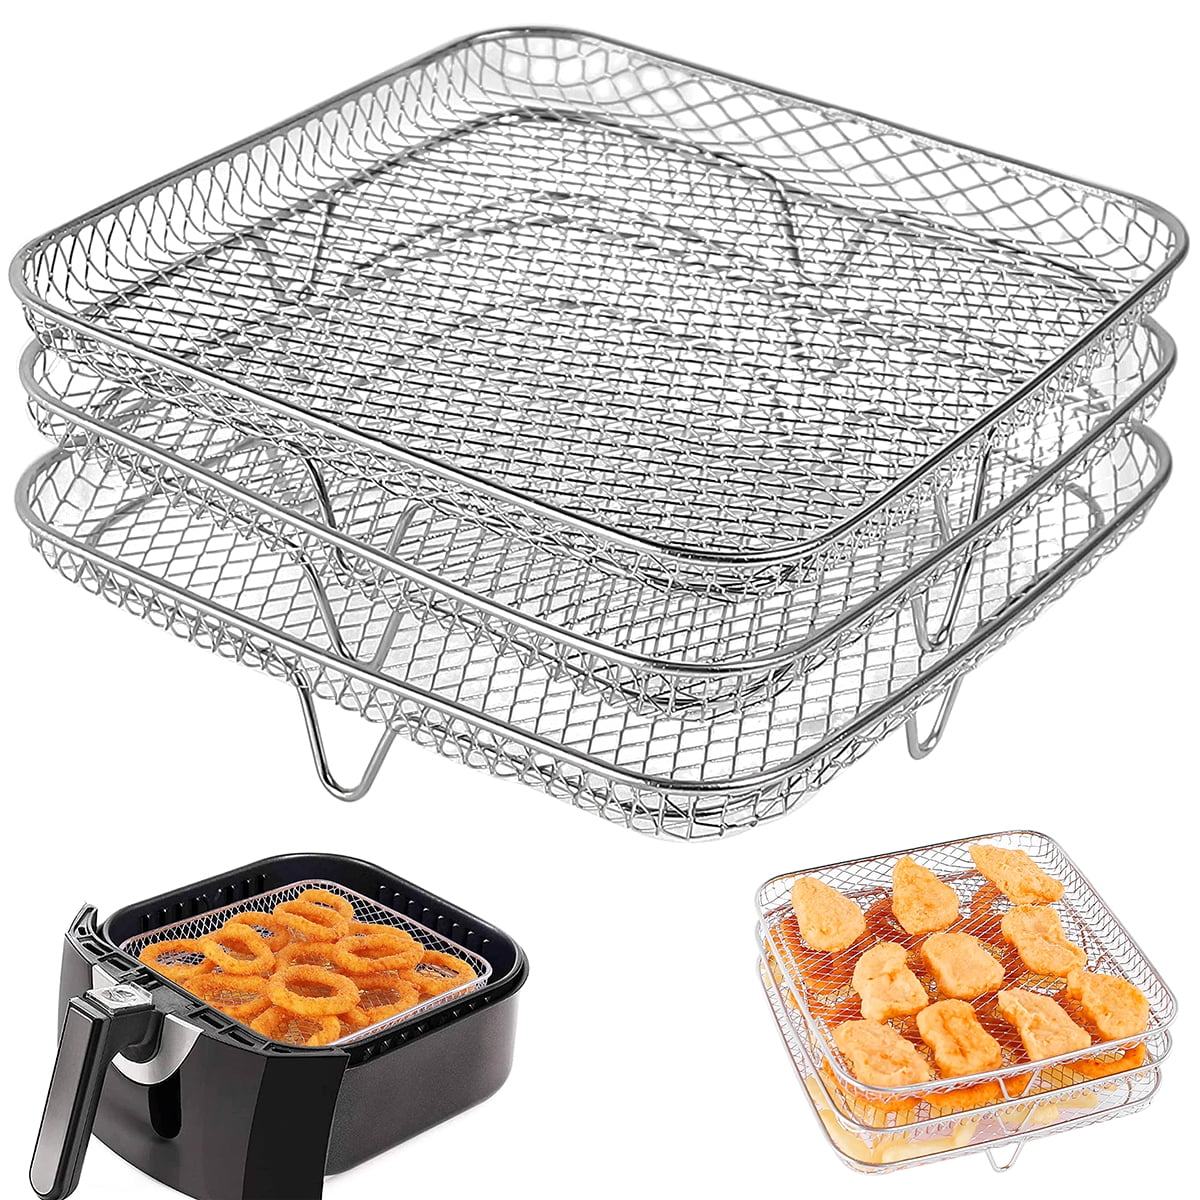 ROBOT-GXG Stainless Steel Dehydrator Rack 5-layer Air Fryer Stand